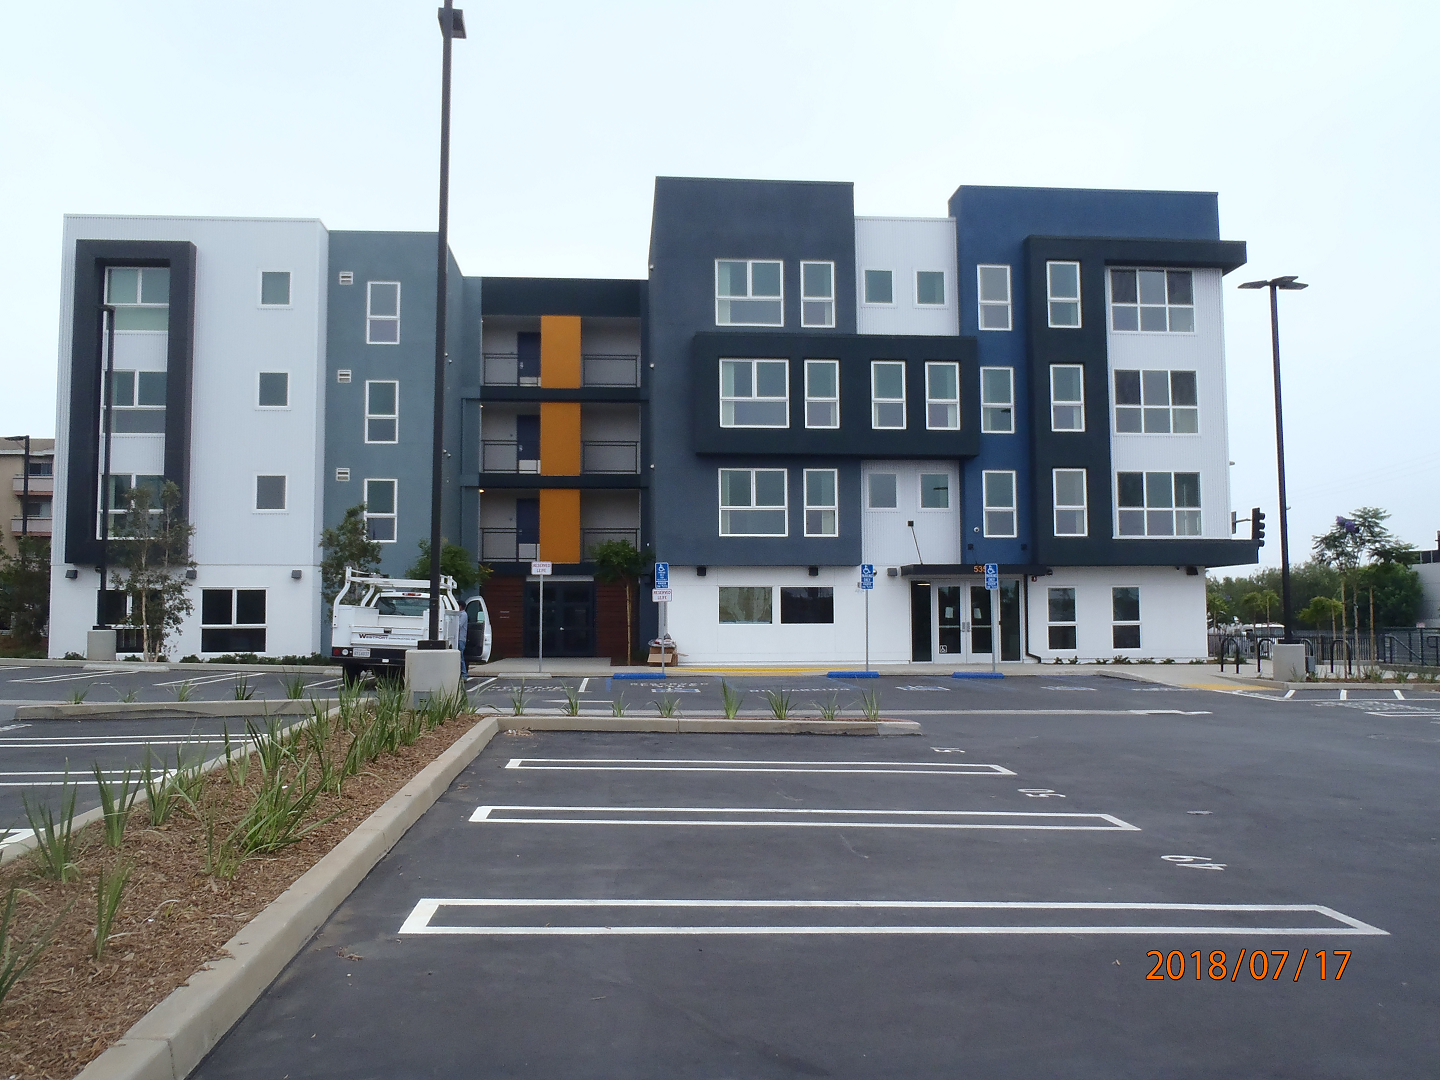 Front view of 4 floor building with parking lot